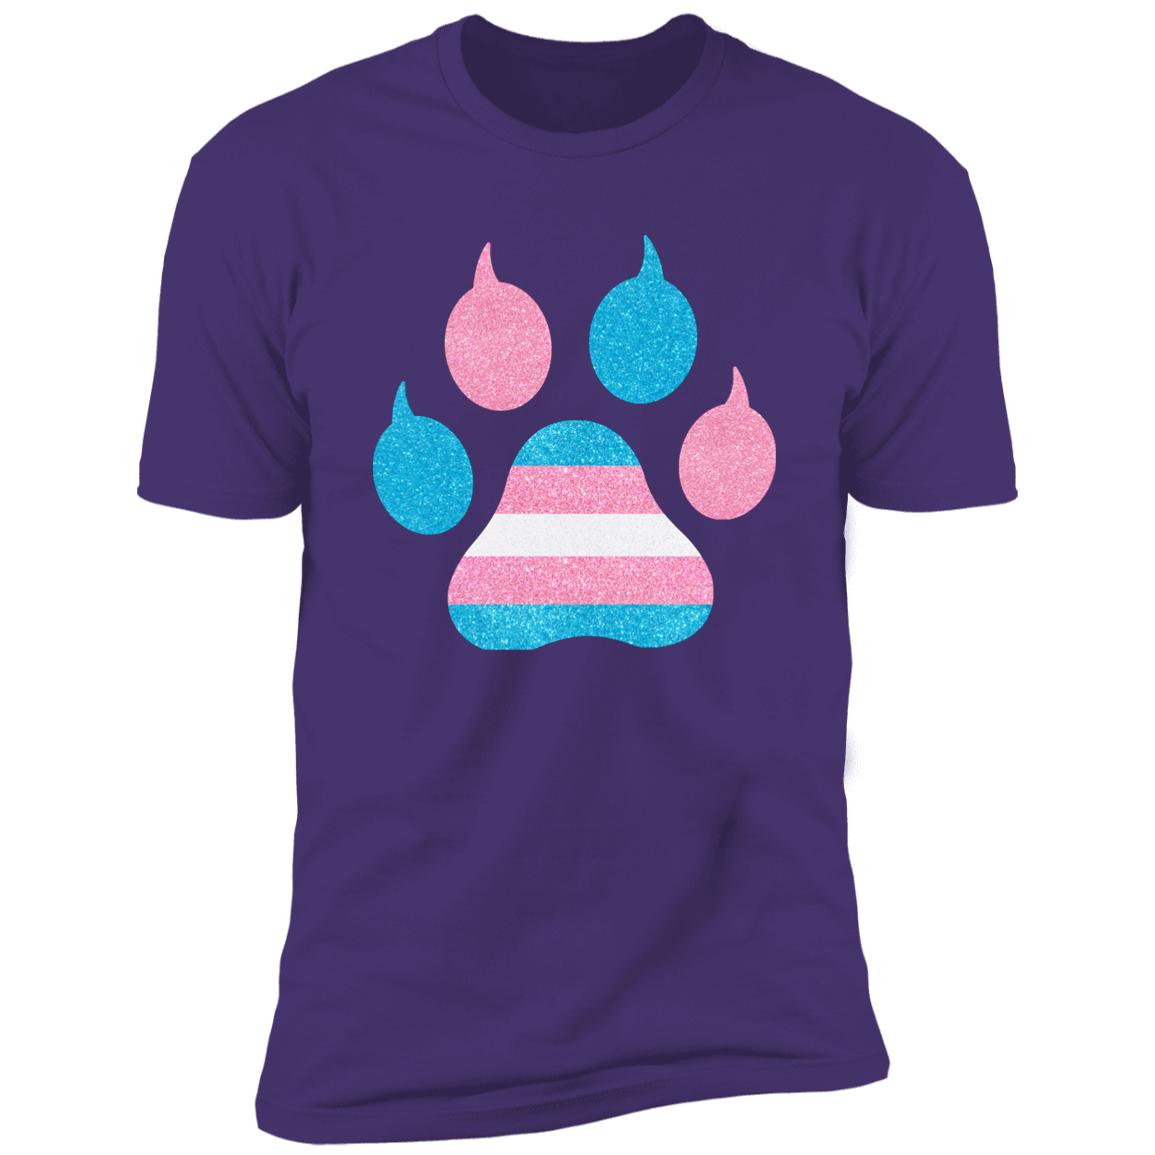 Trans Pride Cat Paw trans pride t-shirt,  trans cat paw pride shirt for humans, in purple rush